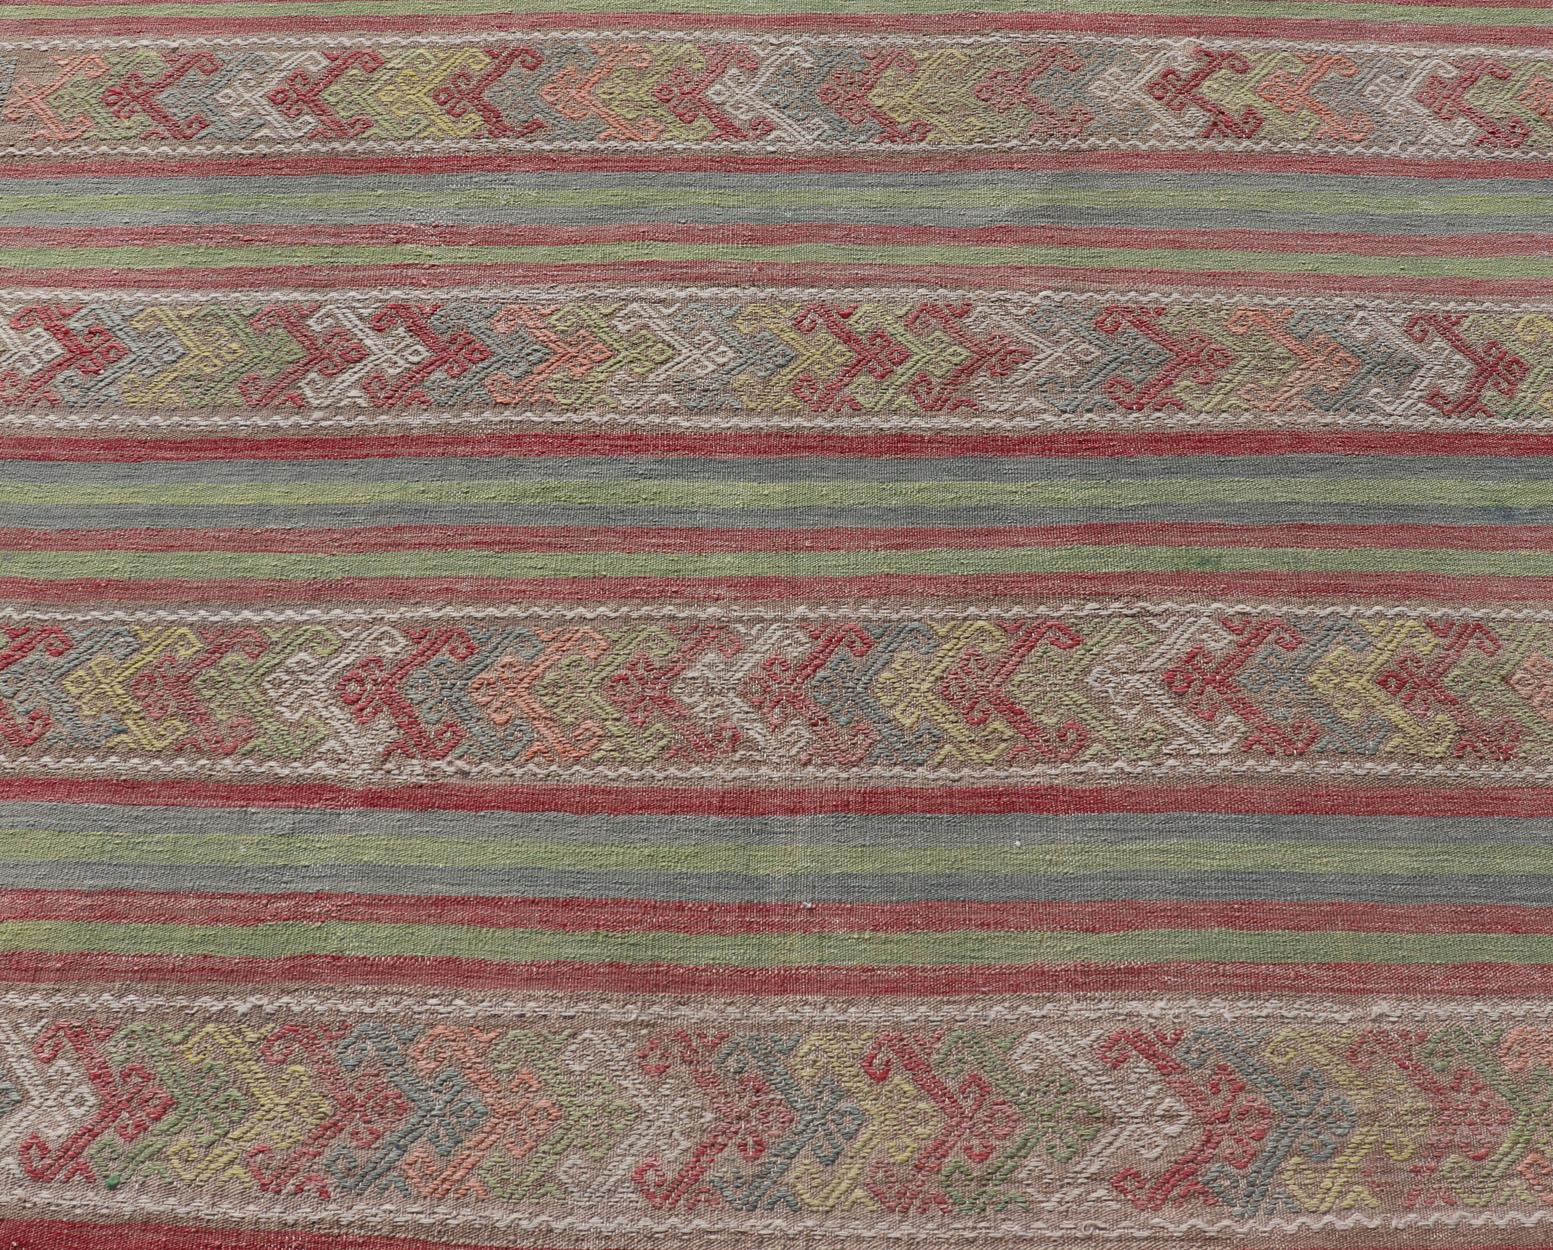 Turkish Colorful Vintage Embroidered Kilim with Stripes and Alternating Geometric Motifs For Sale